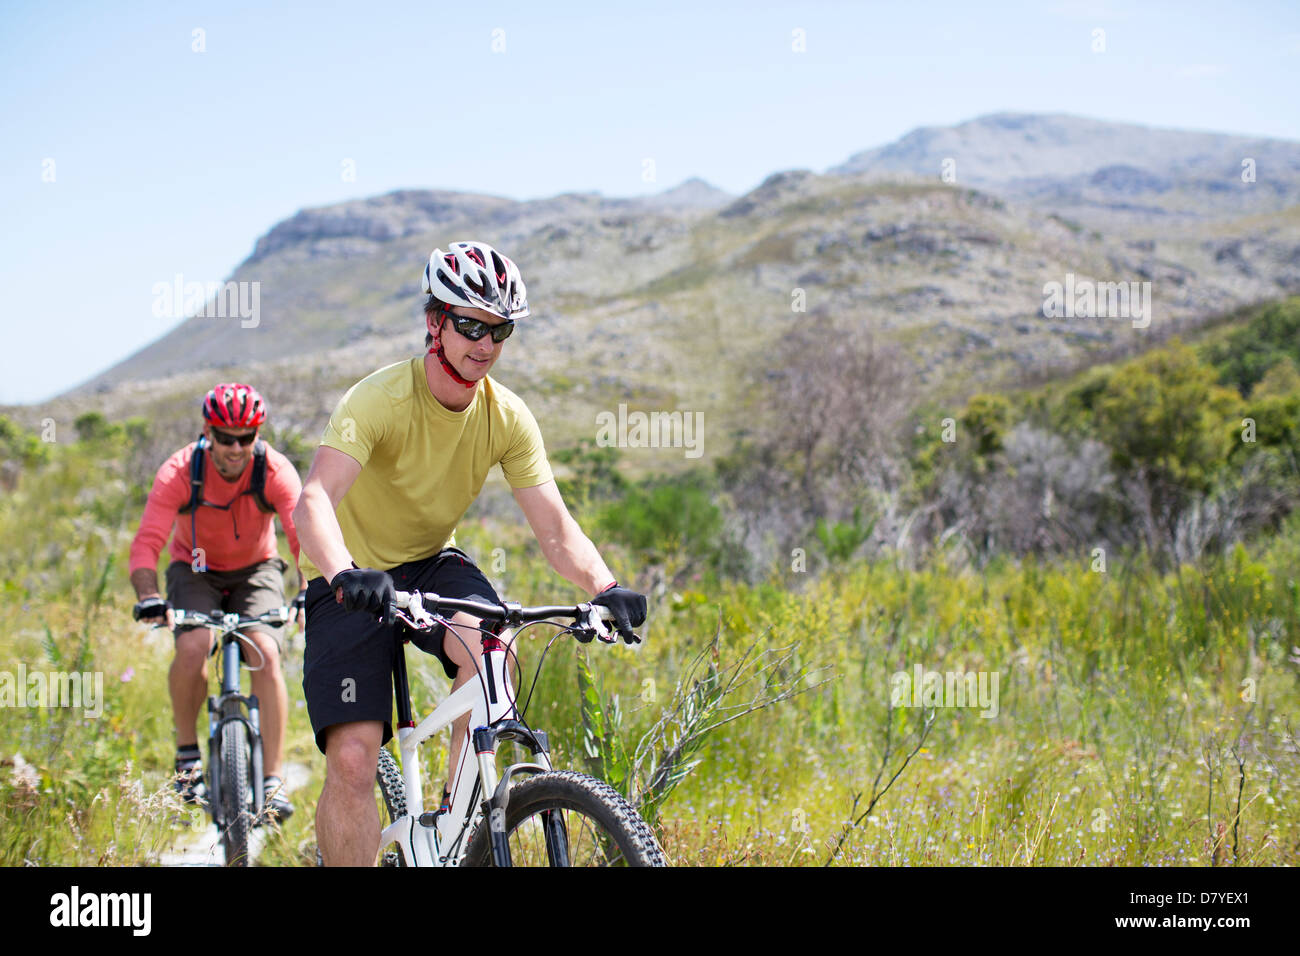 Mountain Bikers on dirt path Banque D'Images